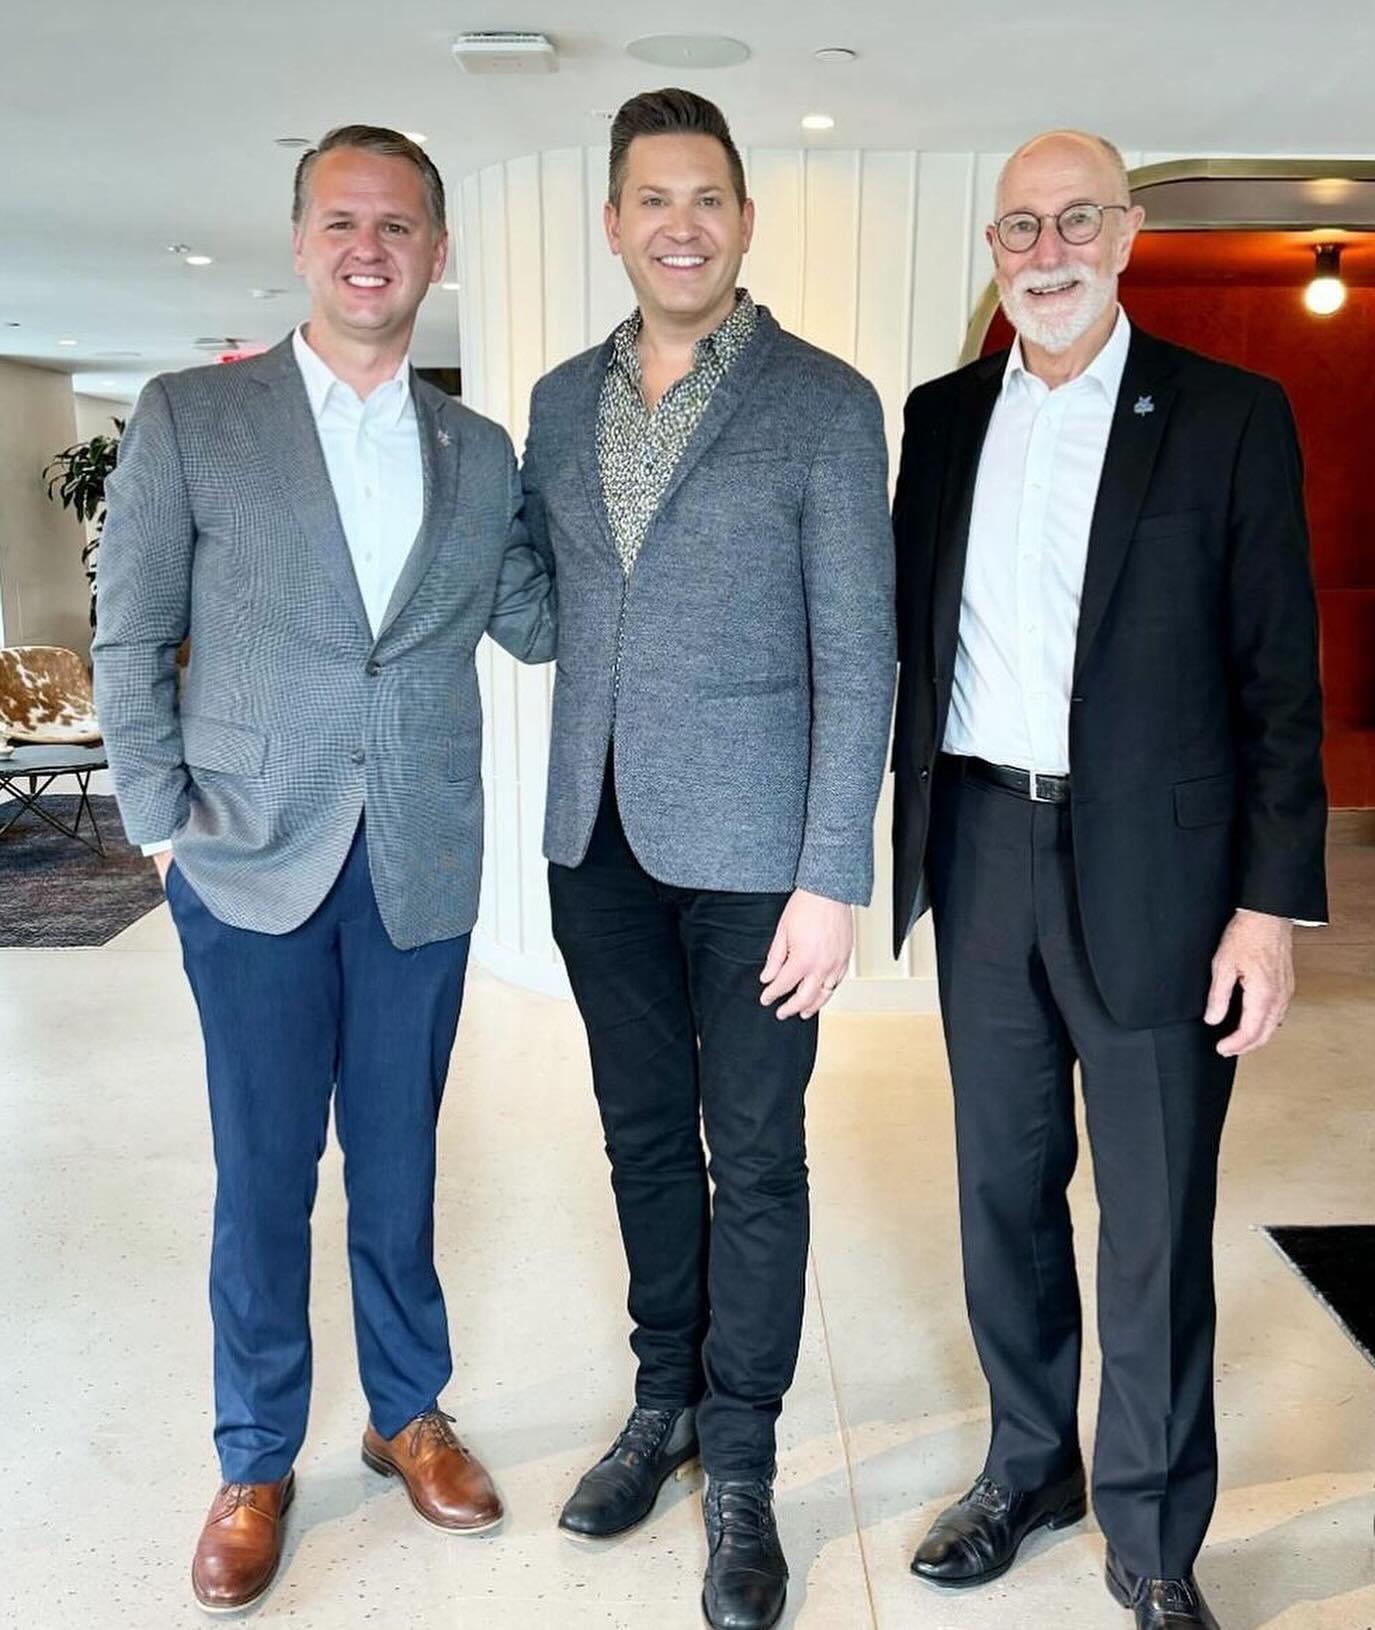 Alumni Hank Stampfl and Robert Postotnik each hosted OCU President Dr. Kenneth Evans at their workplaces in NYC this week, discussing their impressive careers and the future of OCU. Hank is the founder of Revel Rouge Events and Robert is VP of Design